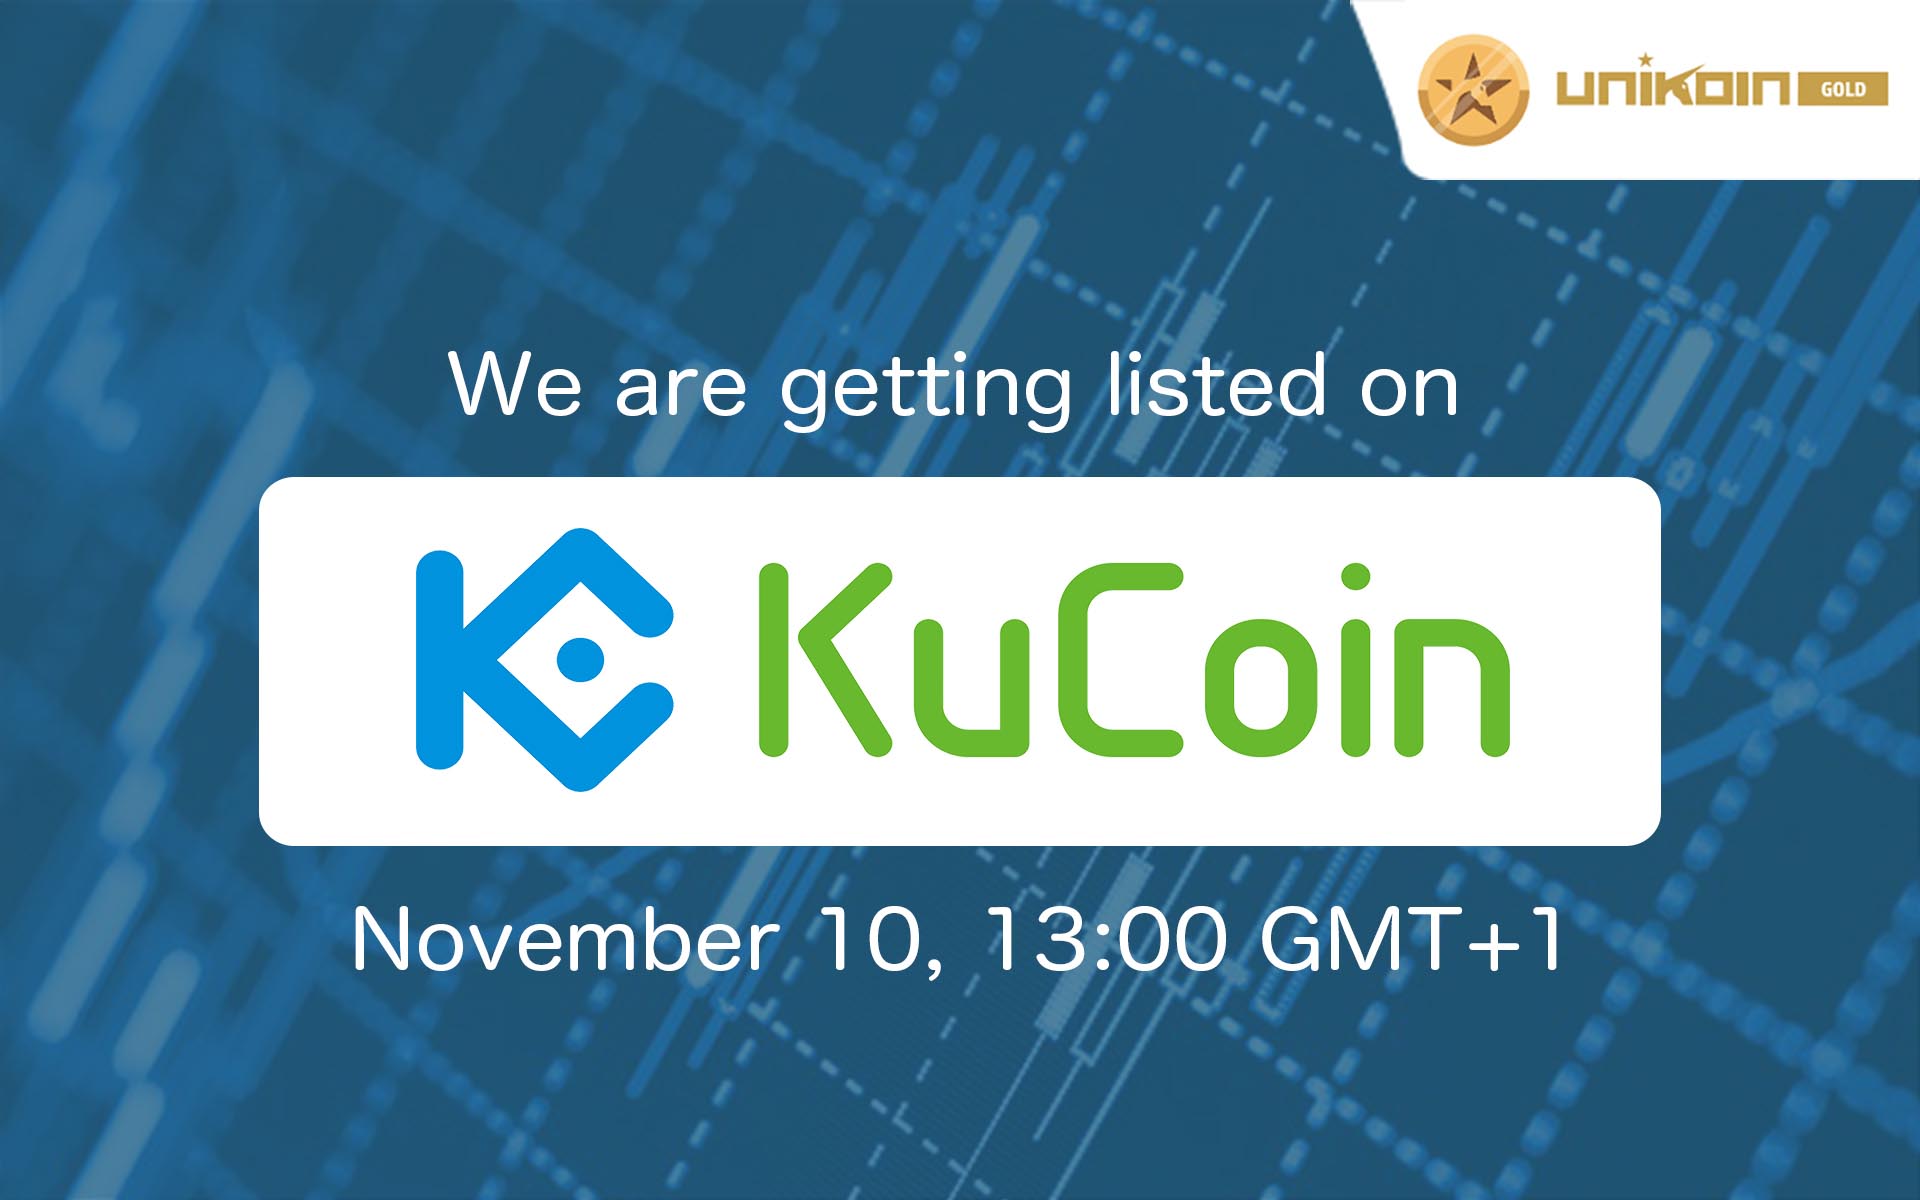 UnikoinGold to join KuCoin’s Unique Offerings, Opens for Trading On Friday November 10